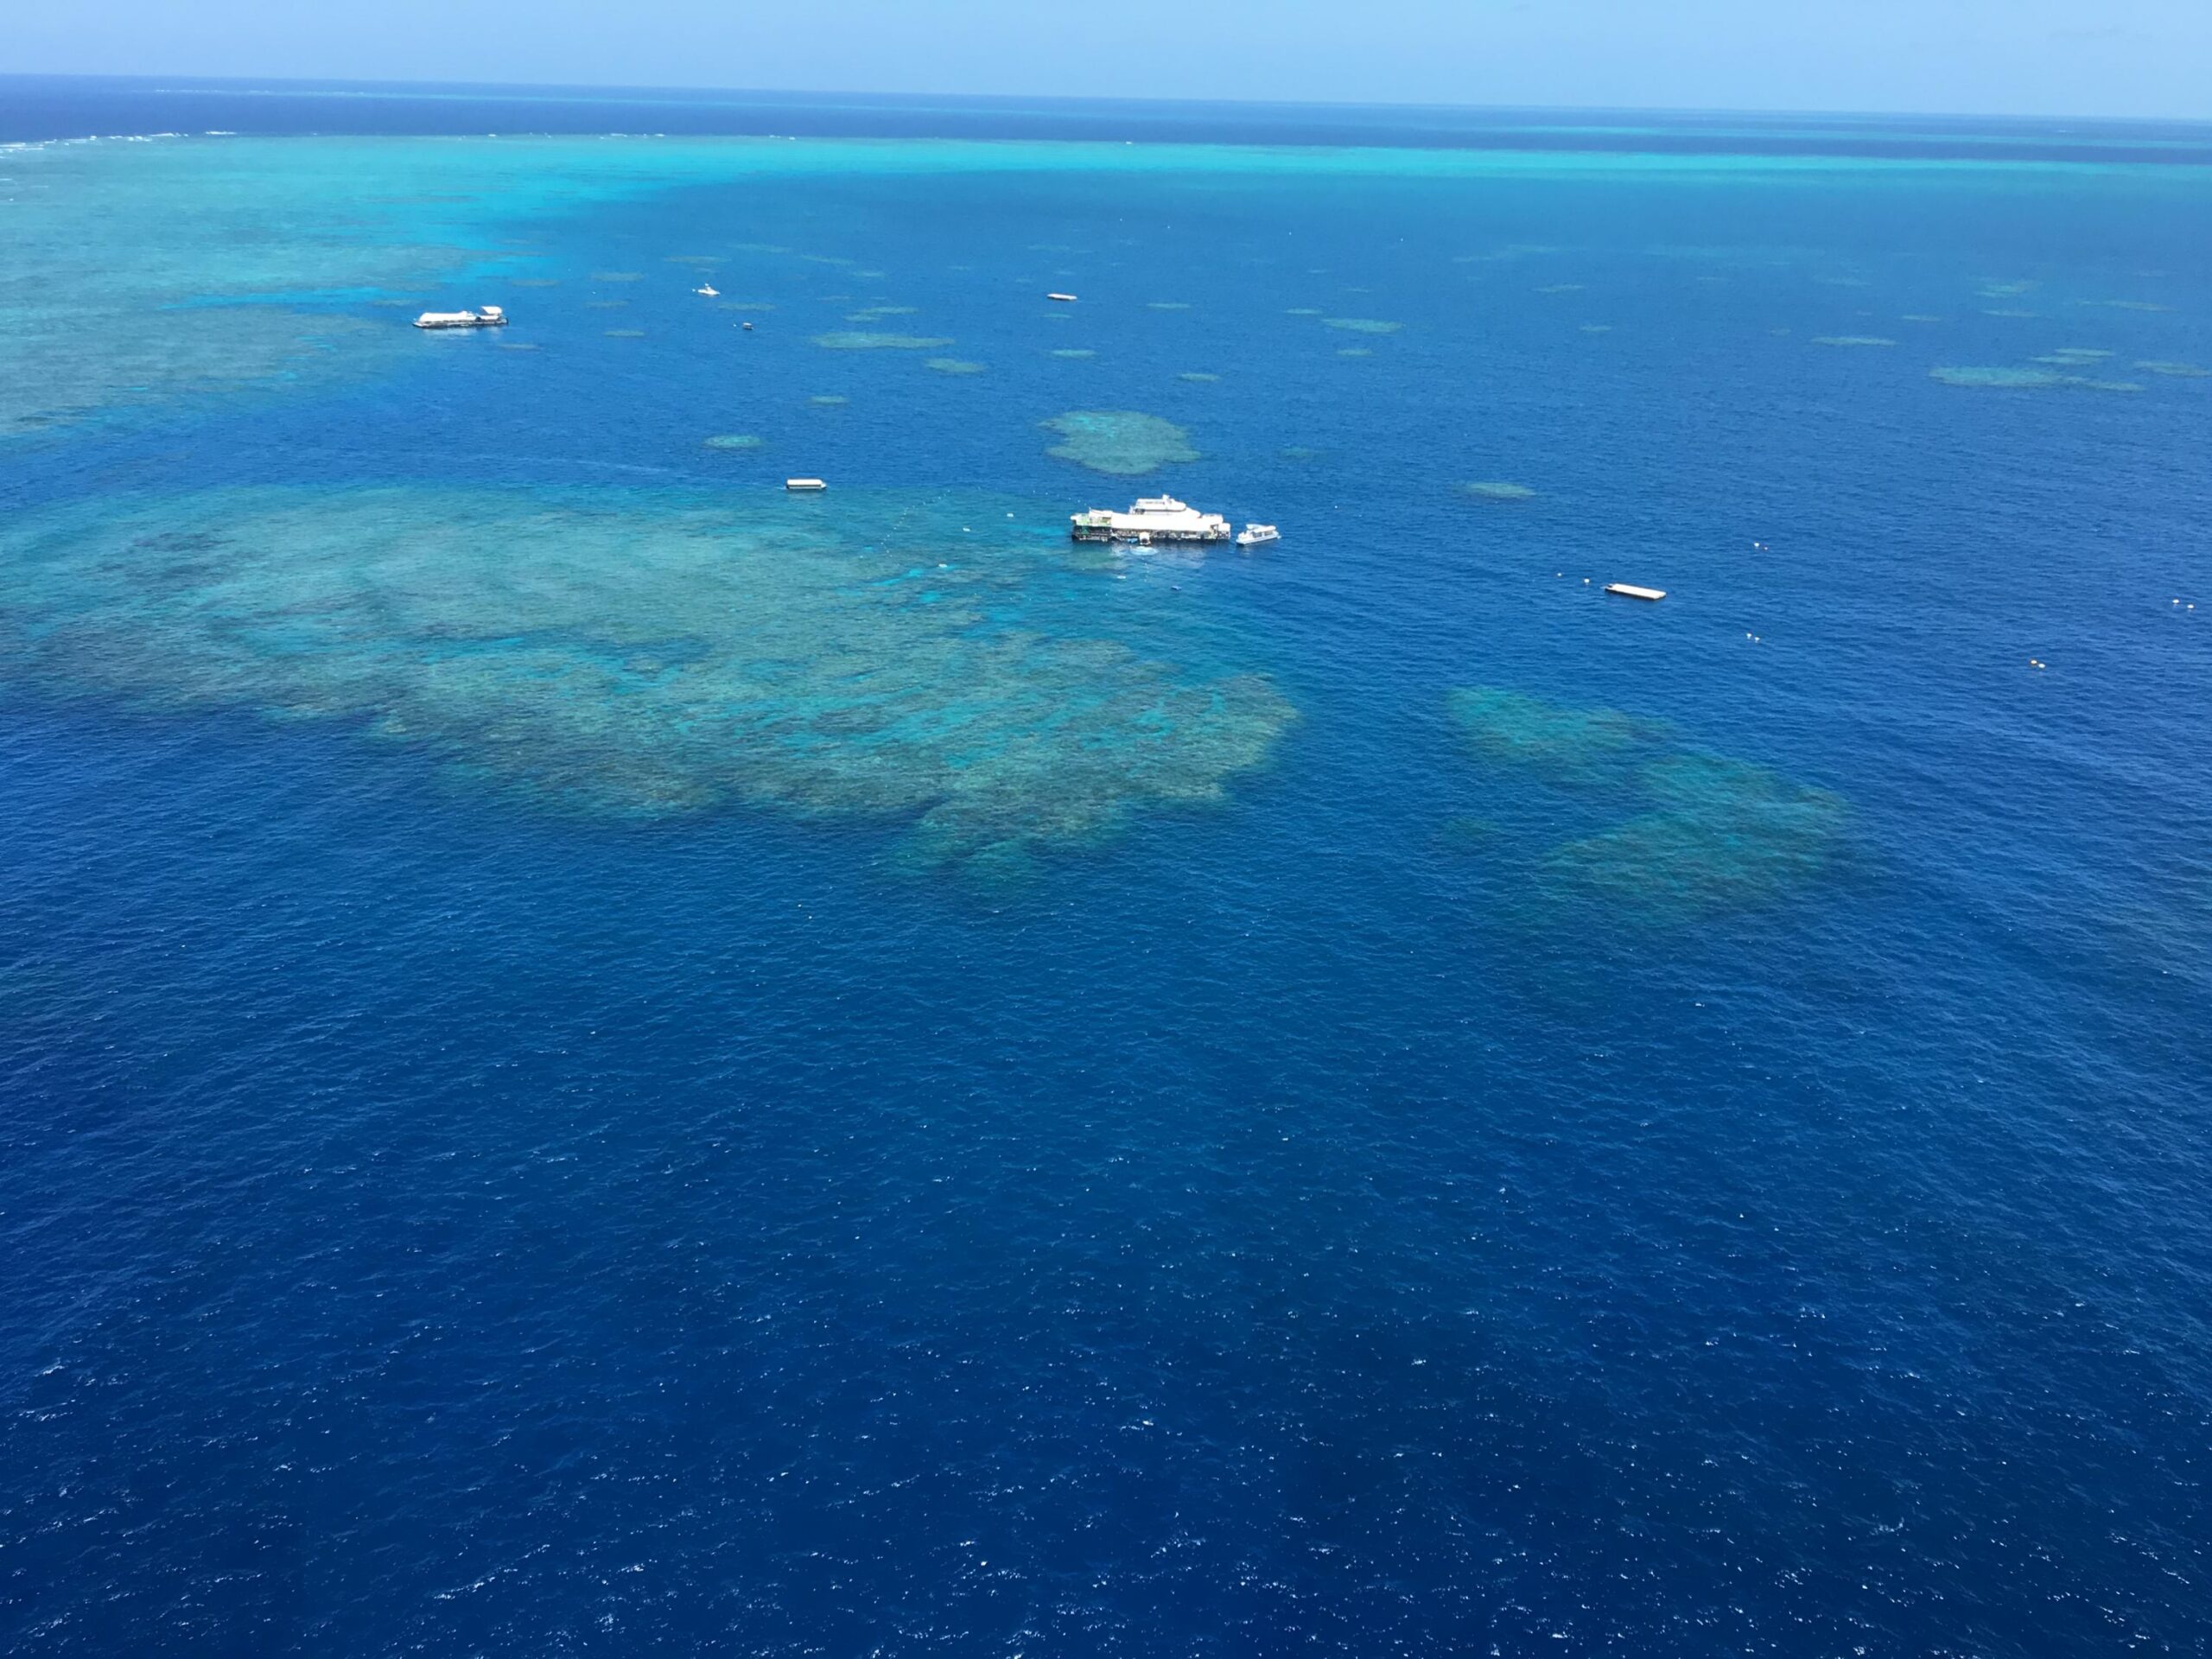 Helicopter view over Great Barrier Reef near Cairns, AU - Photo by Allen Rieland